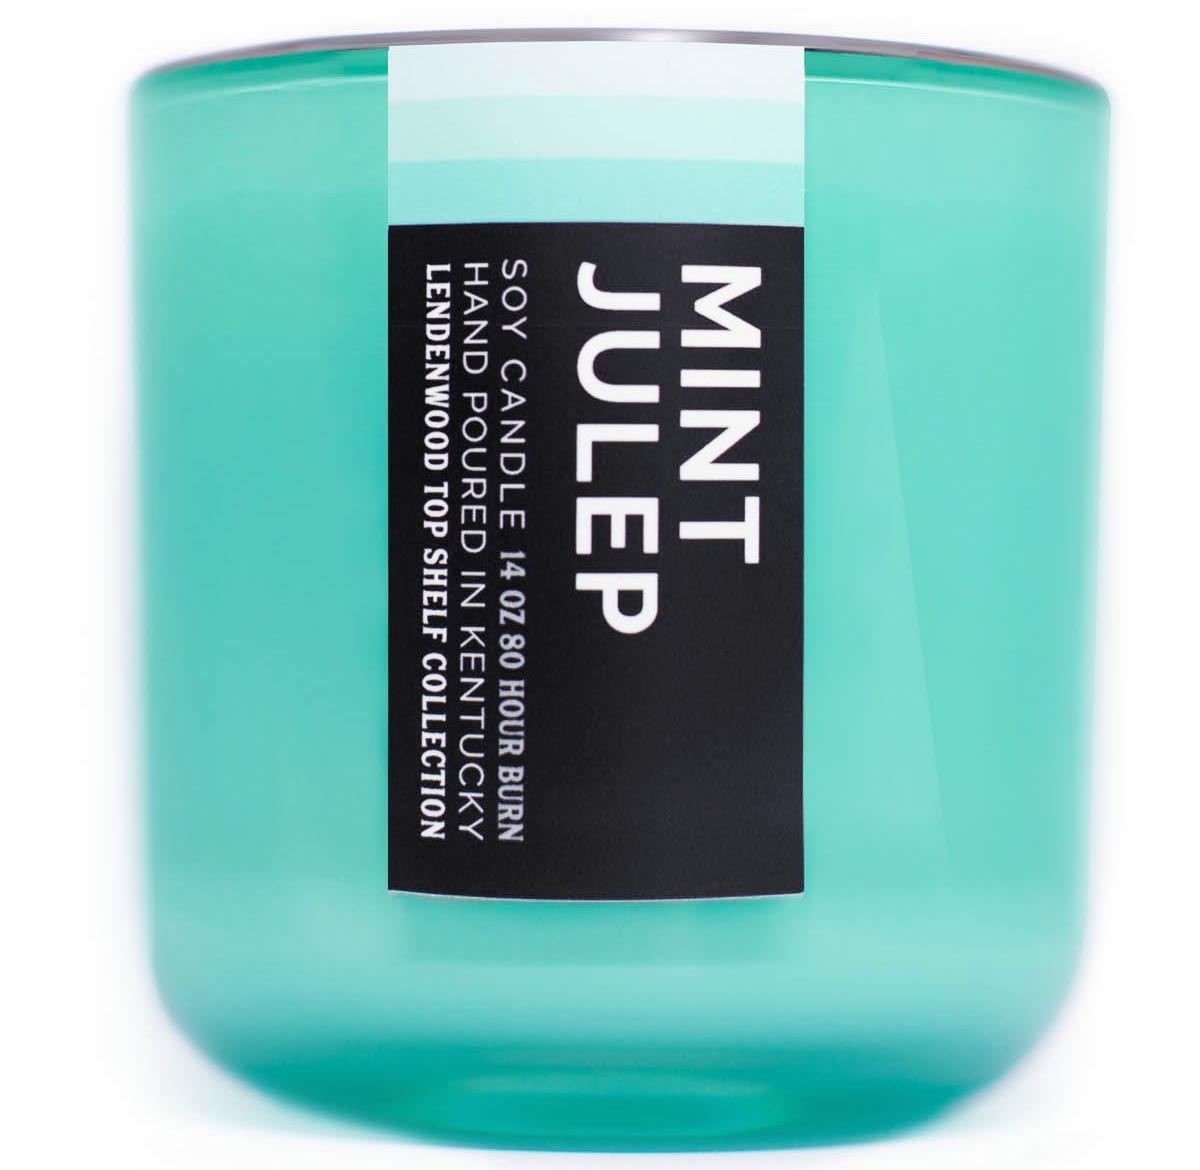 Mint Julep Large Scented Soy Candle